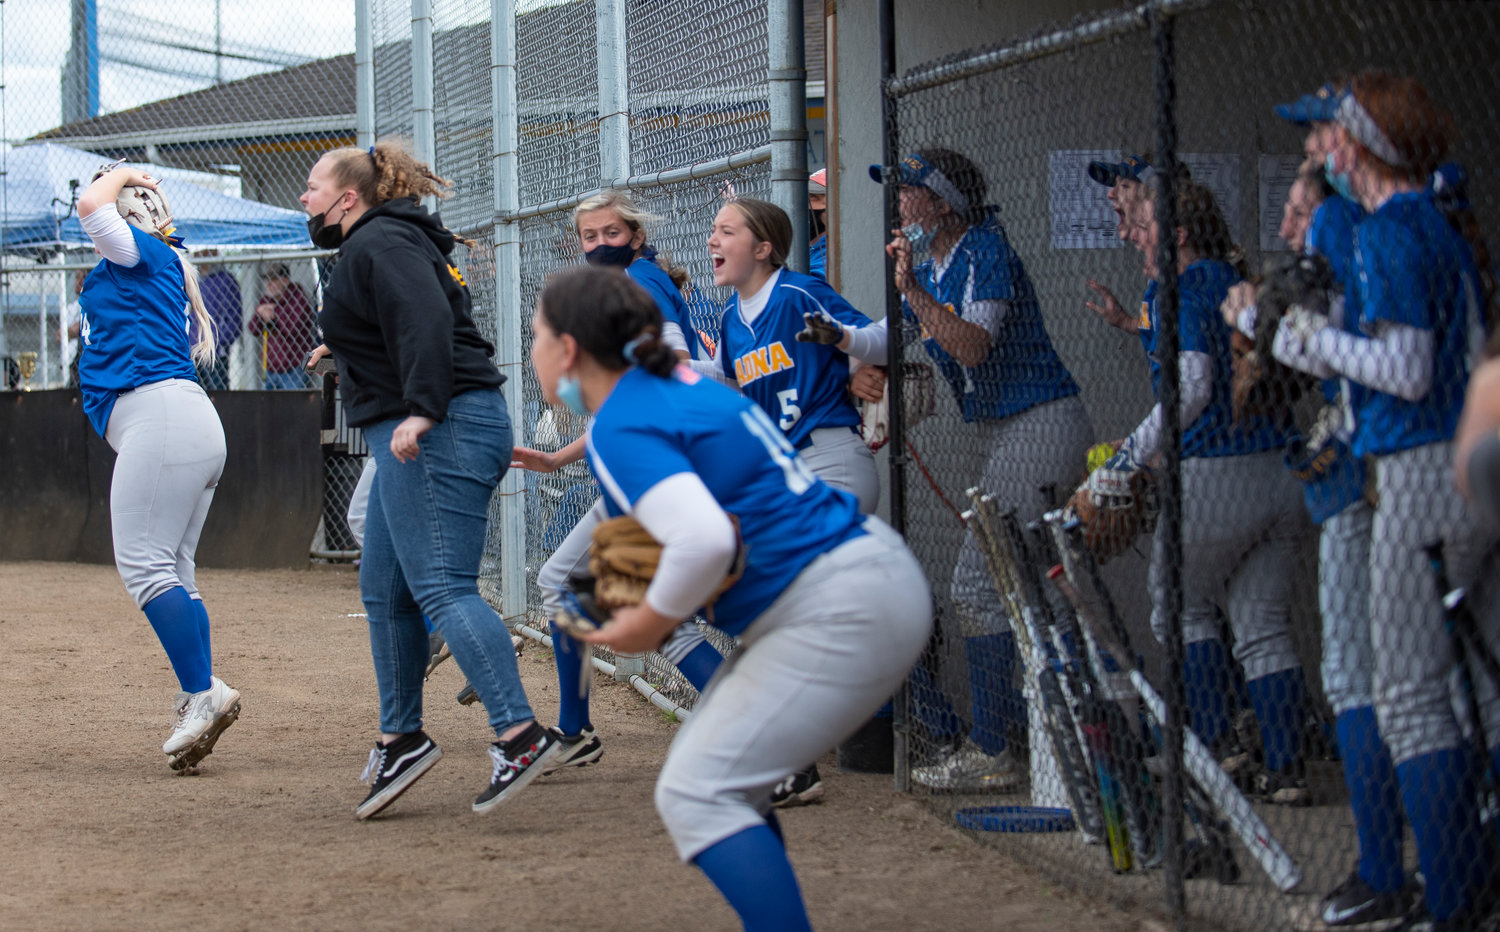 Adna's dugout reacts to Haley Rainey's walk-off single to give the PIrates a 4-3 win over Forks in eight innings for the district title on Saturday.